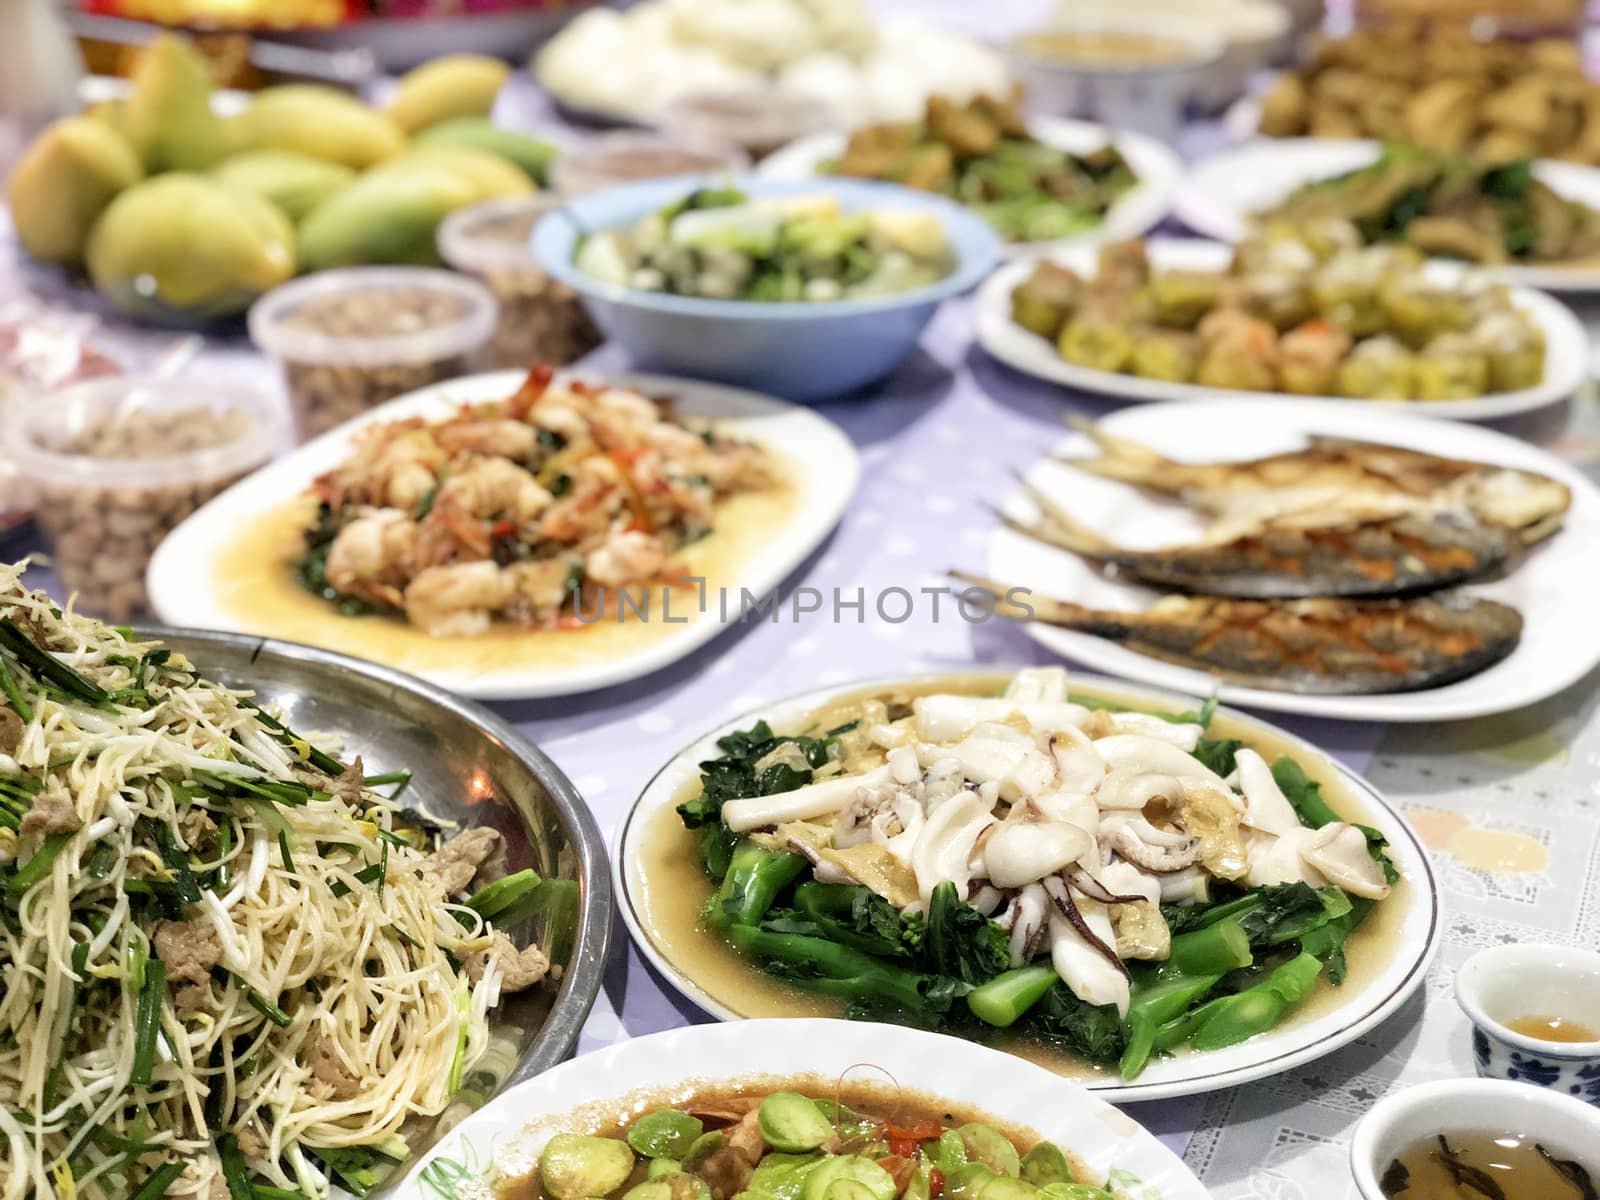 Chinese Ghost Festival. Sacrificial offering food for pray to go by Surasak